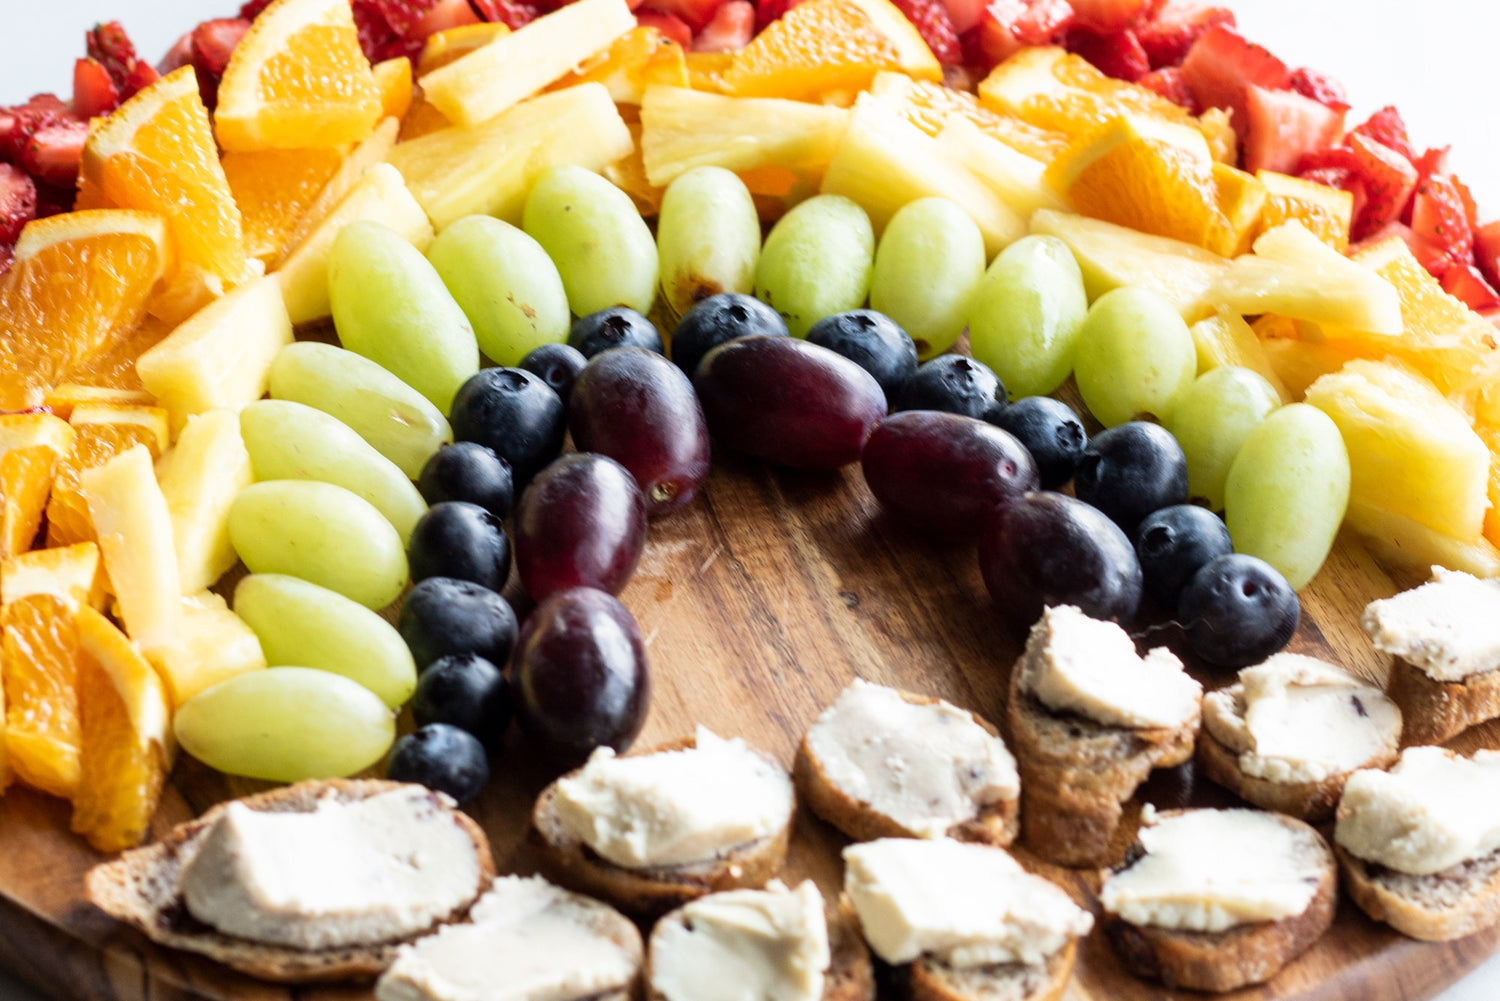 Platter of fruits arranged in a rainbow shape by color. Dairy-free cheese spread on baguette slices form a cloud shape at the base.